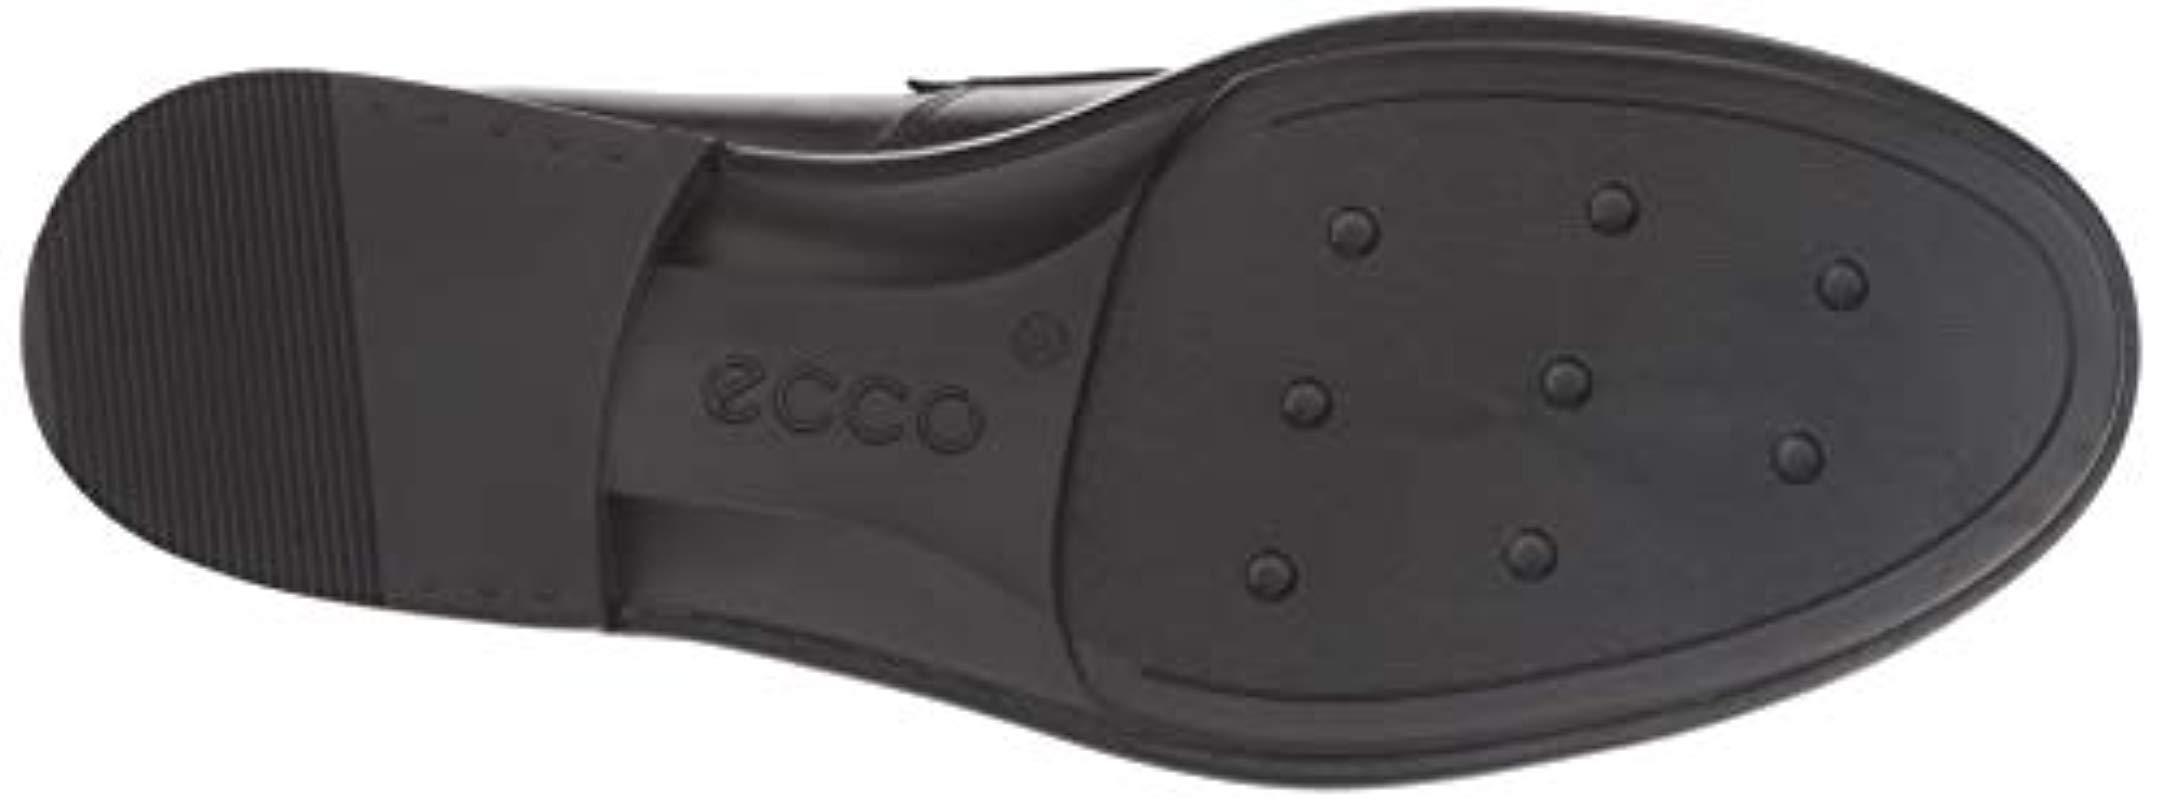 ecco stealth artisan loafer